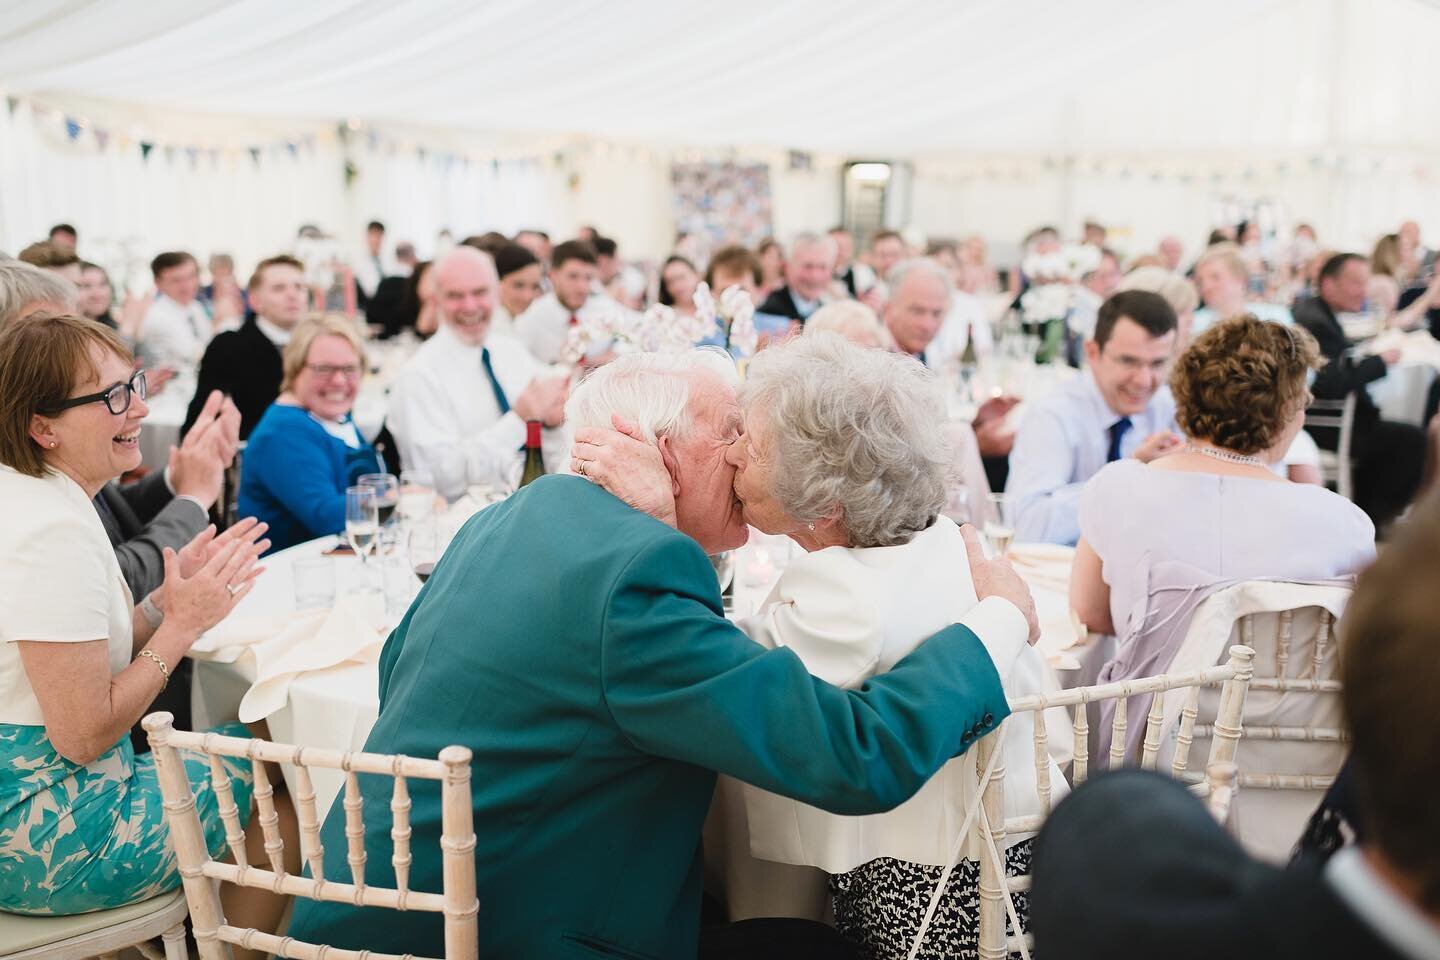 60 years in. Celebrating their anniversary at their grandchild's wedding 👫